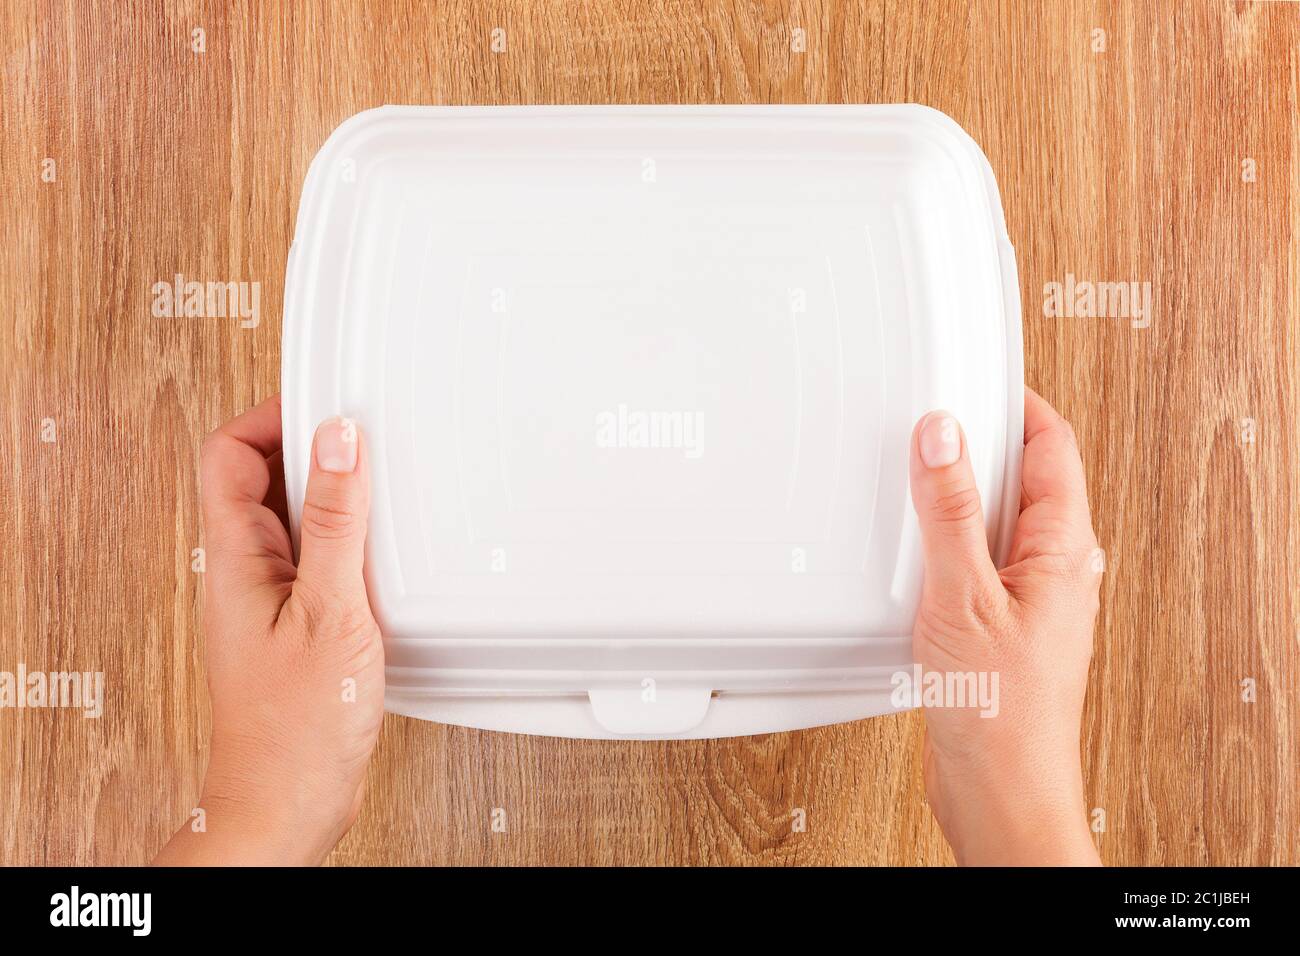 Closed take away box holding in hands Stock Photo